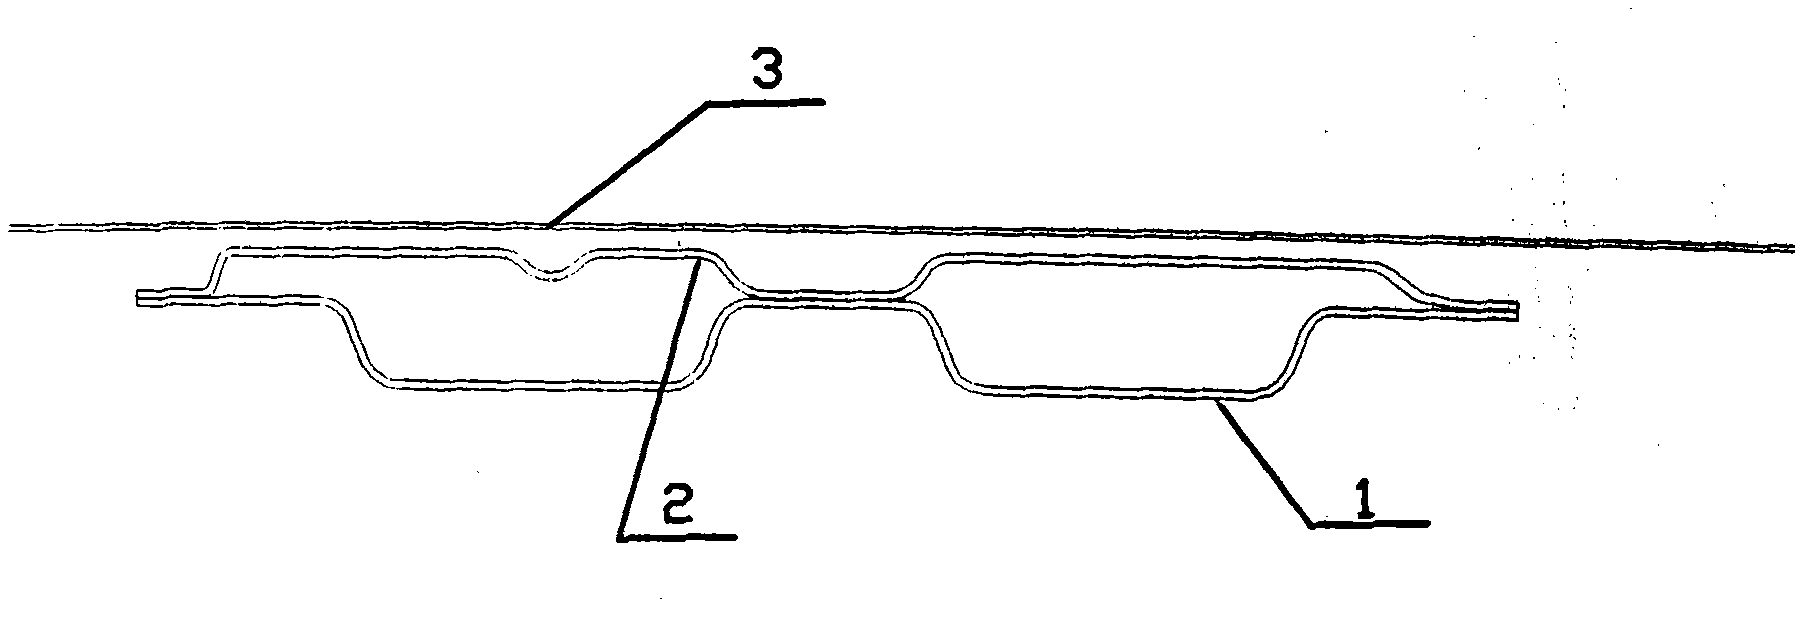 Car roof middle cross beam